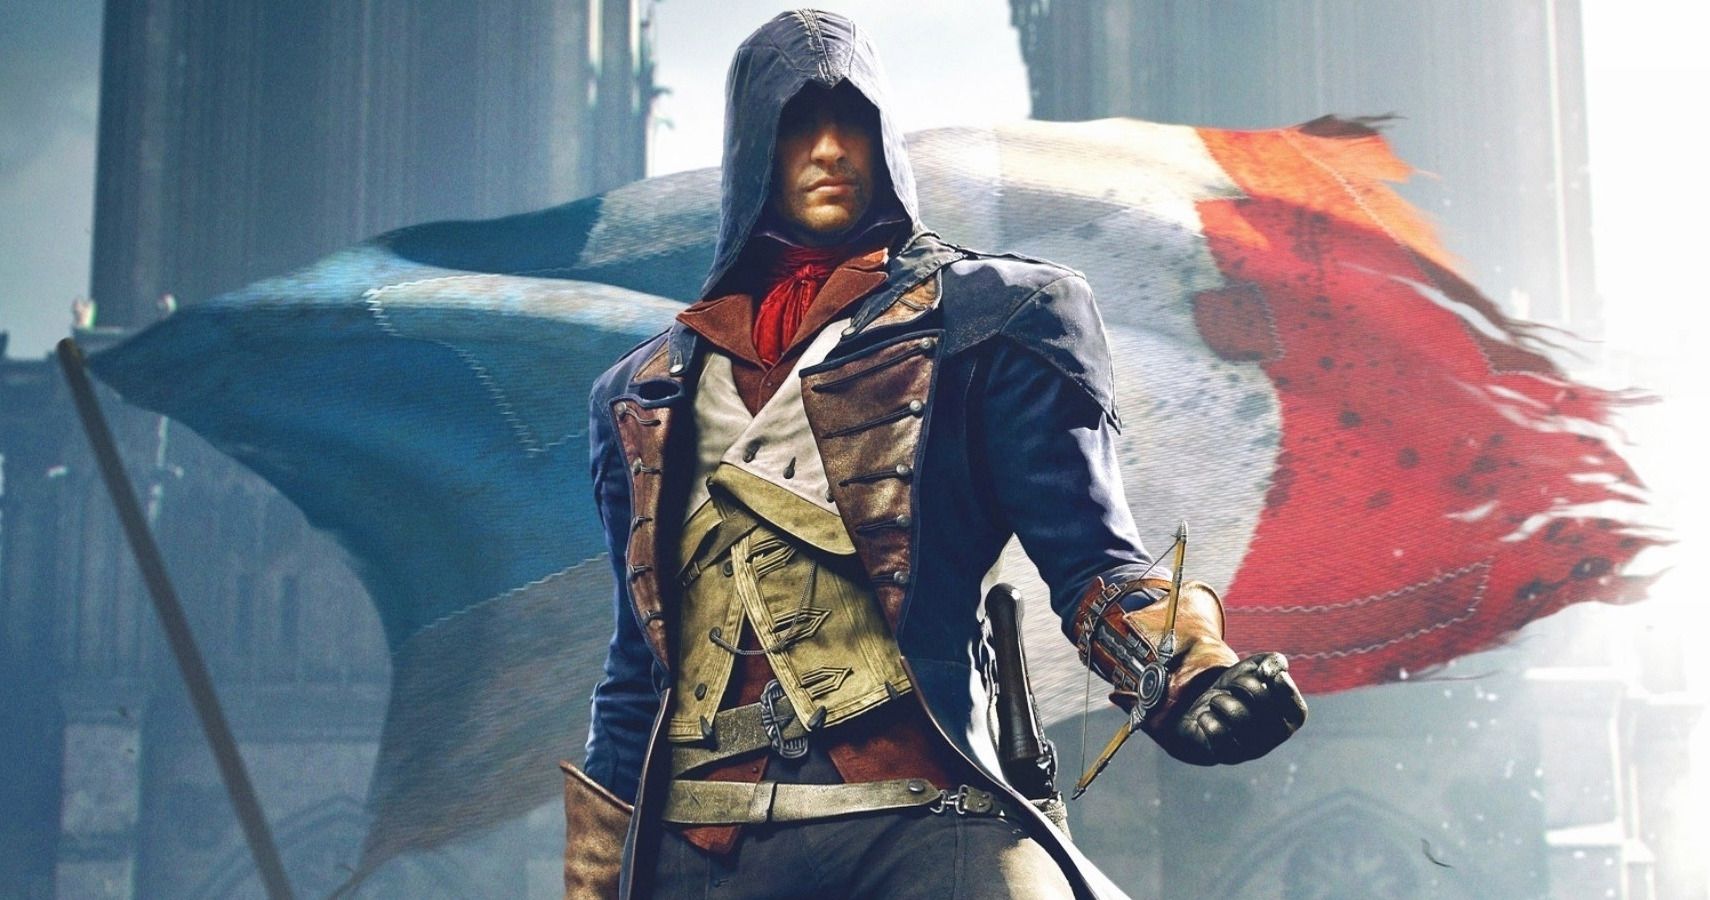 Best Outfits in Assassin's Creed Unity #assassinscreed